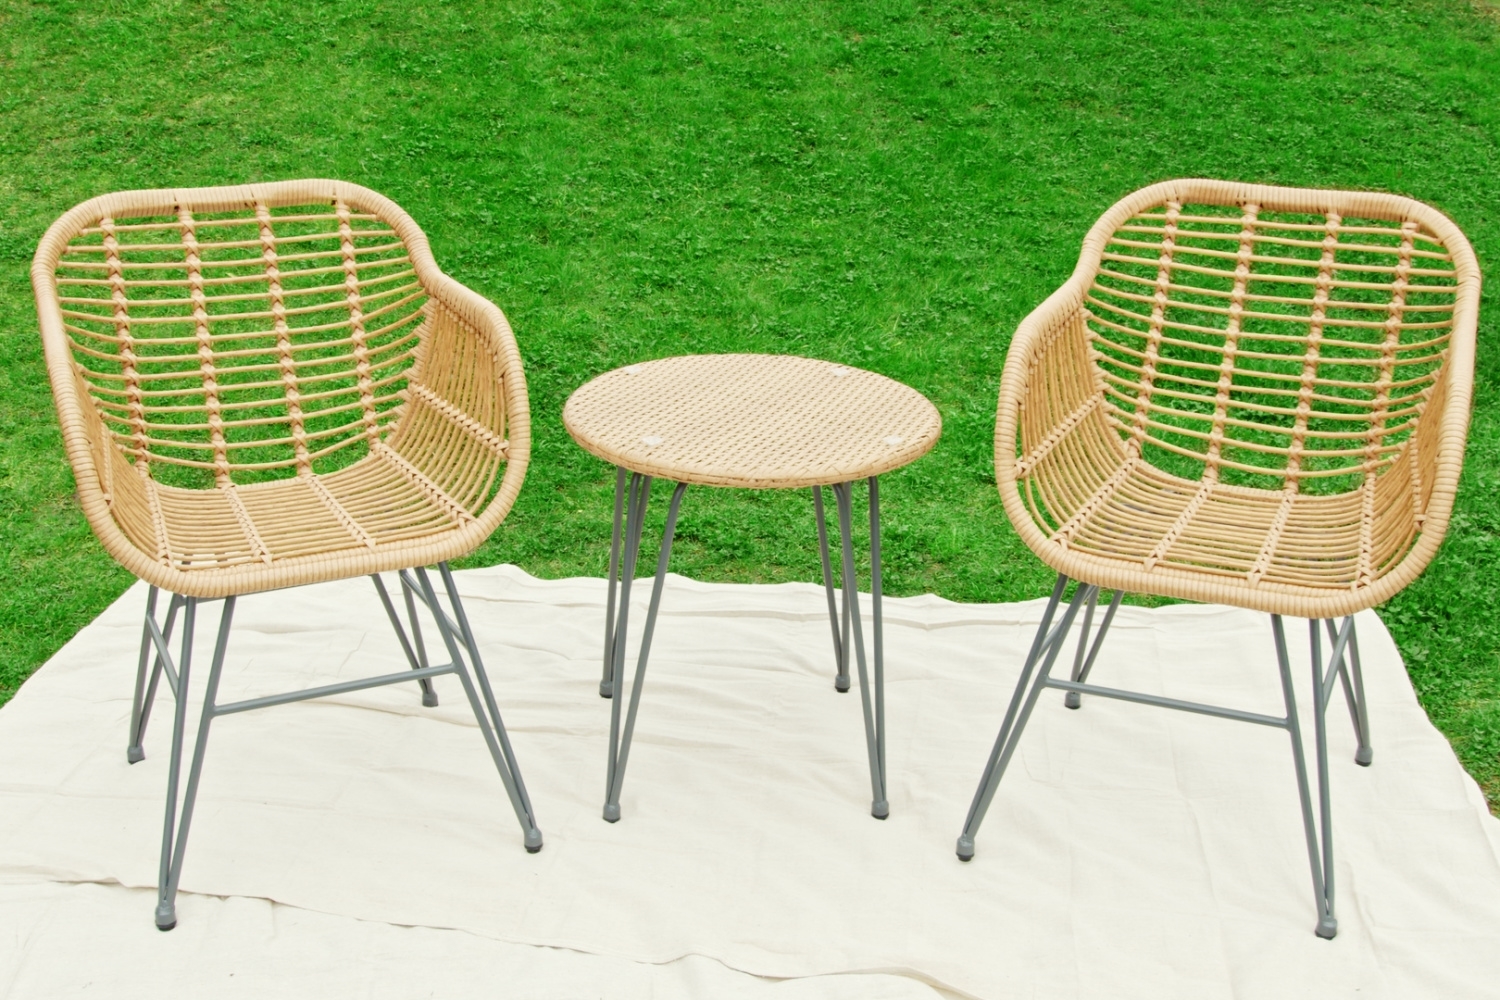 Prepare wicker furniture to be painted